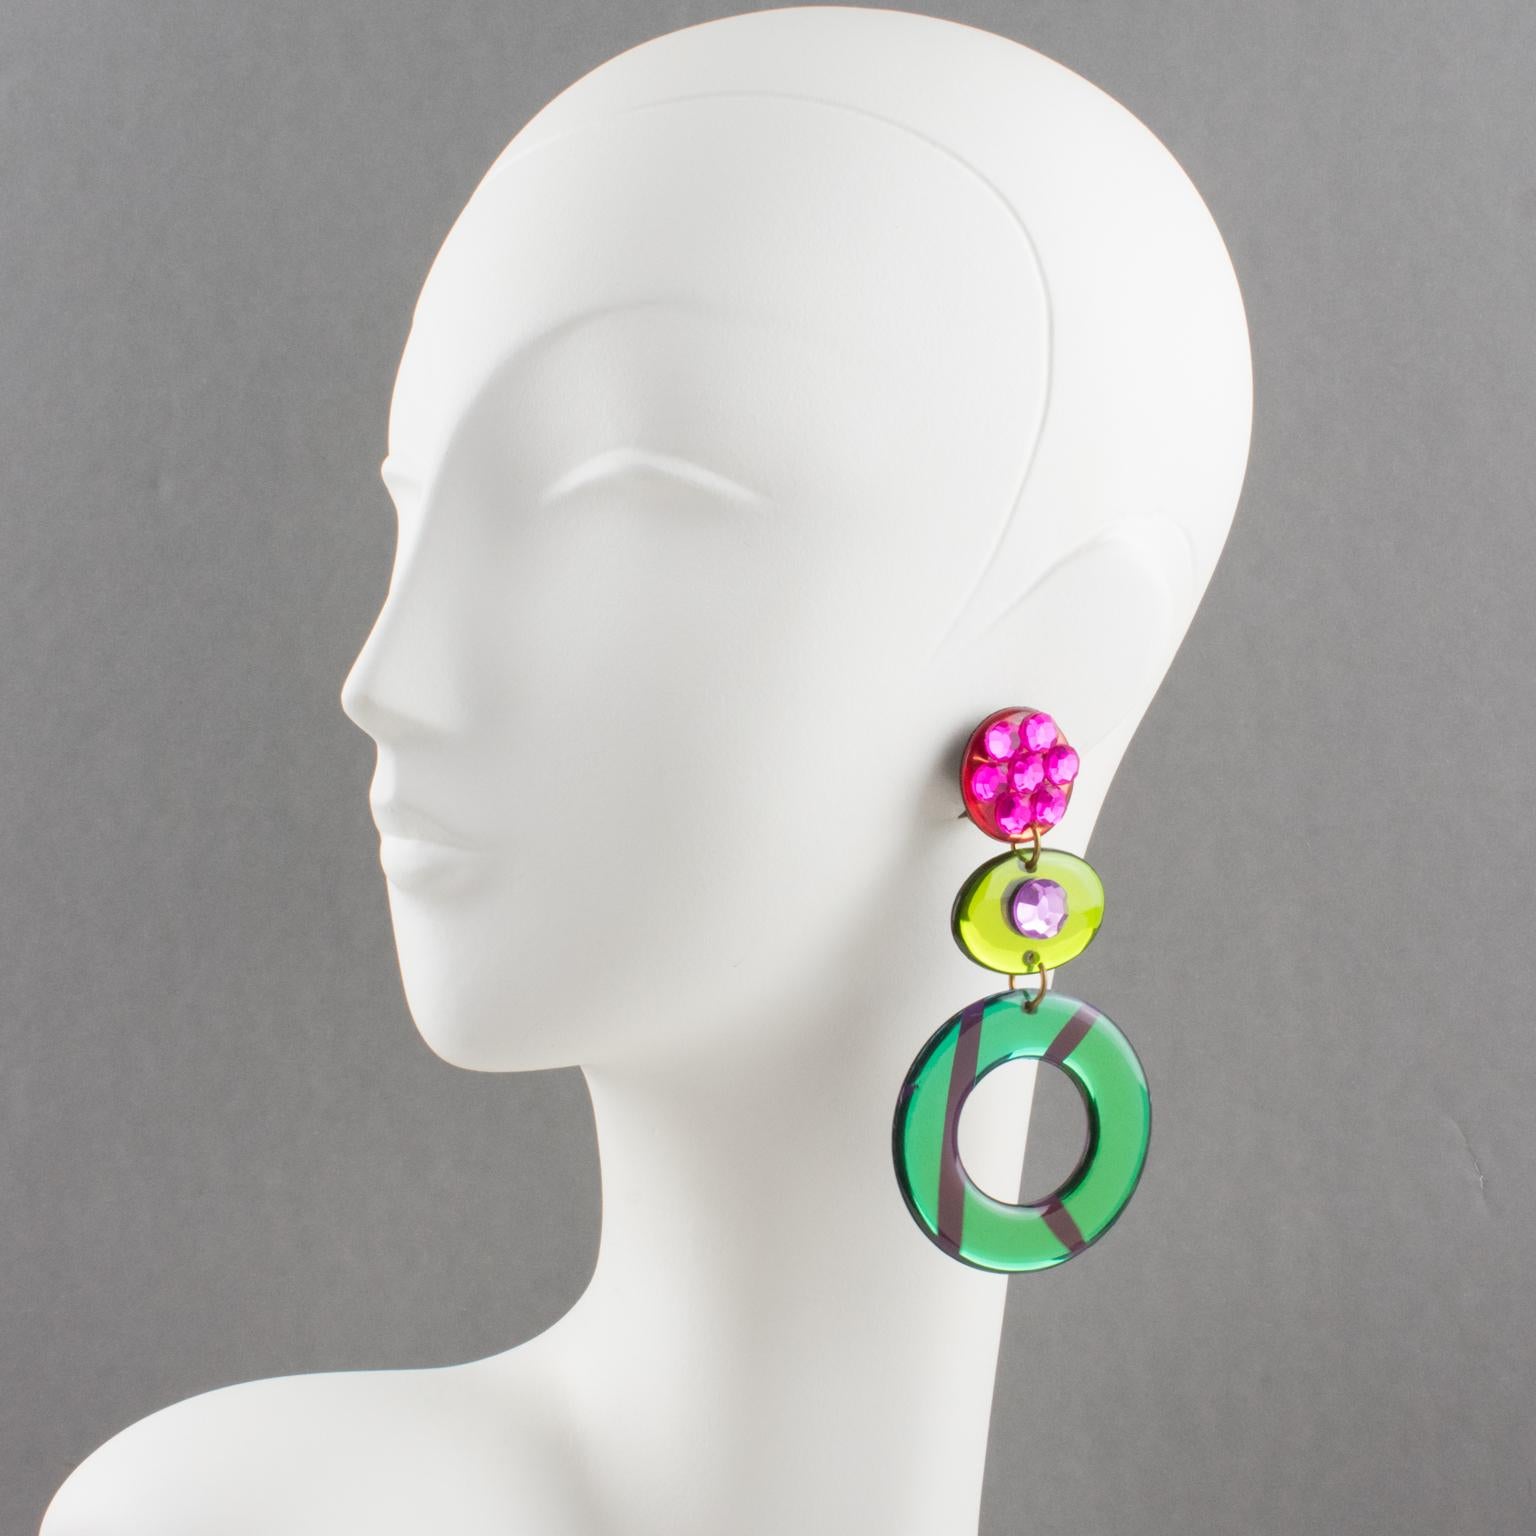 Stunning Italian designer studio Lucite or Resin dangling clip-on earrings. Oversized chandelier design with ovoid and donut shape in emerald green, apple green and salmon pink colors with mirror effect and textured pattern. Earrings are also ornate